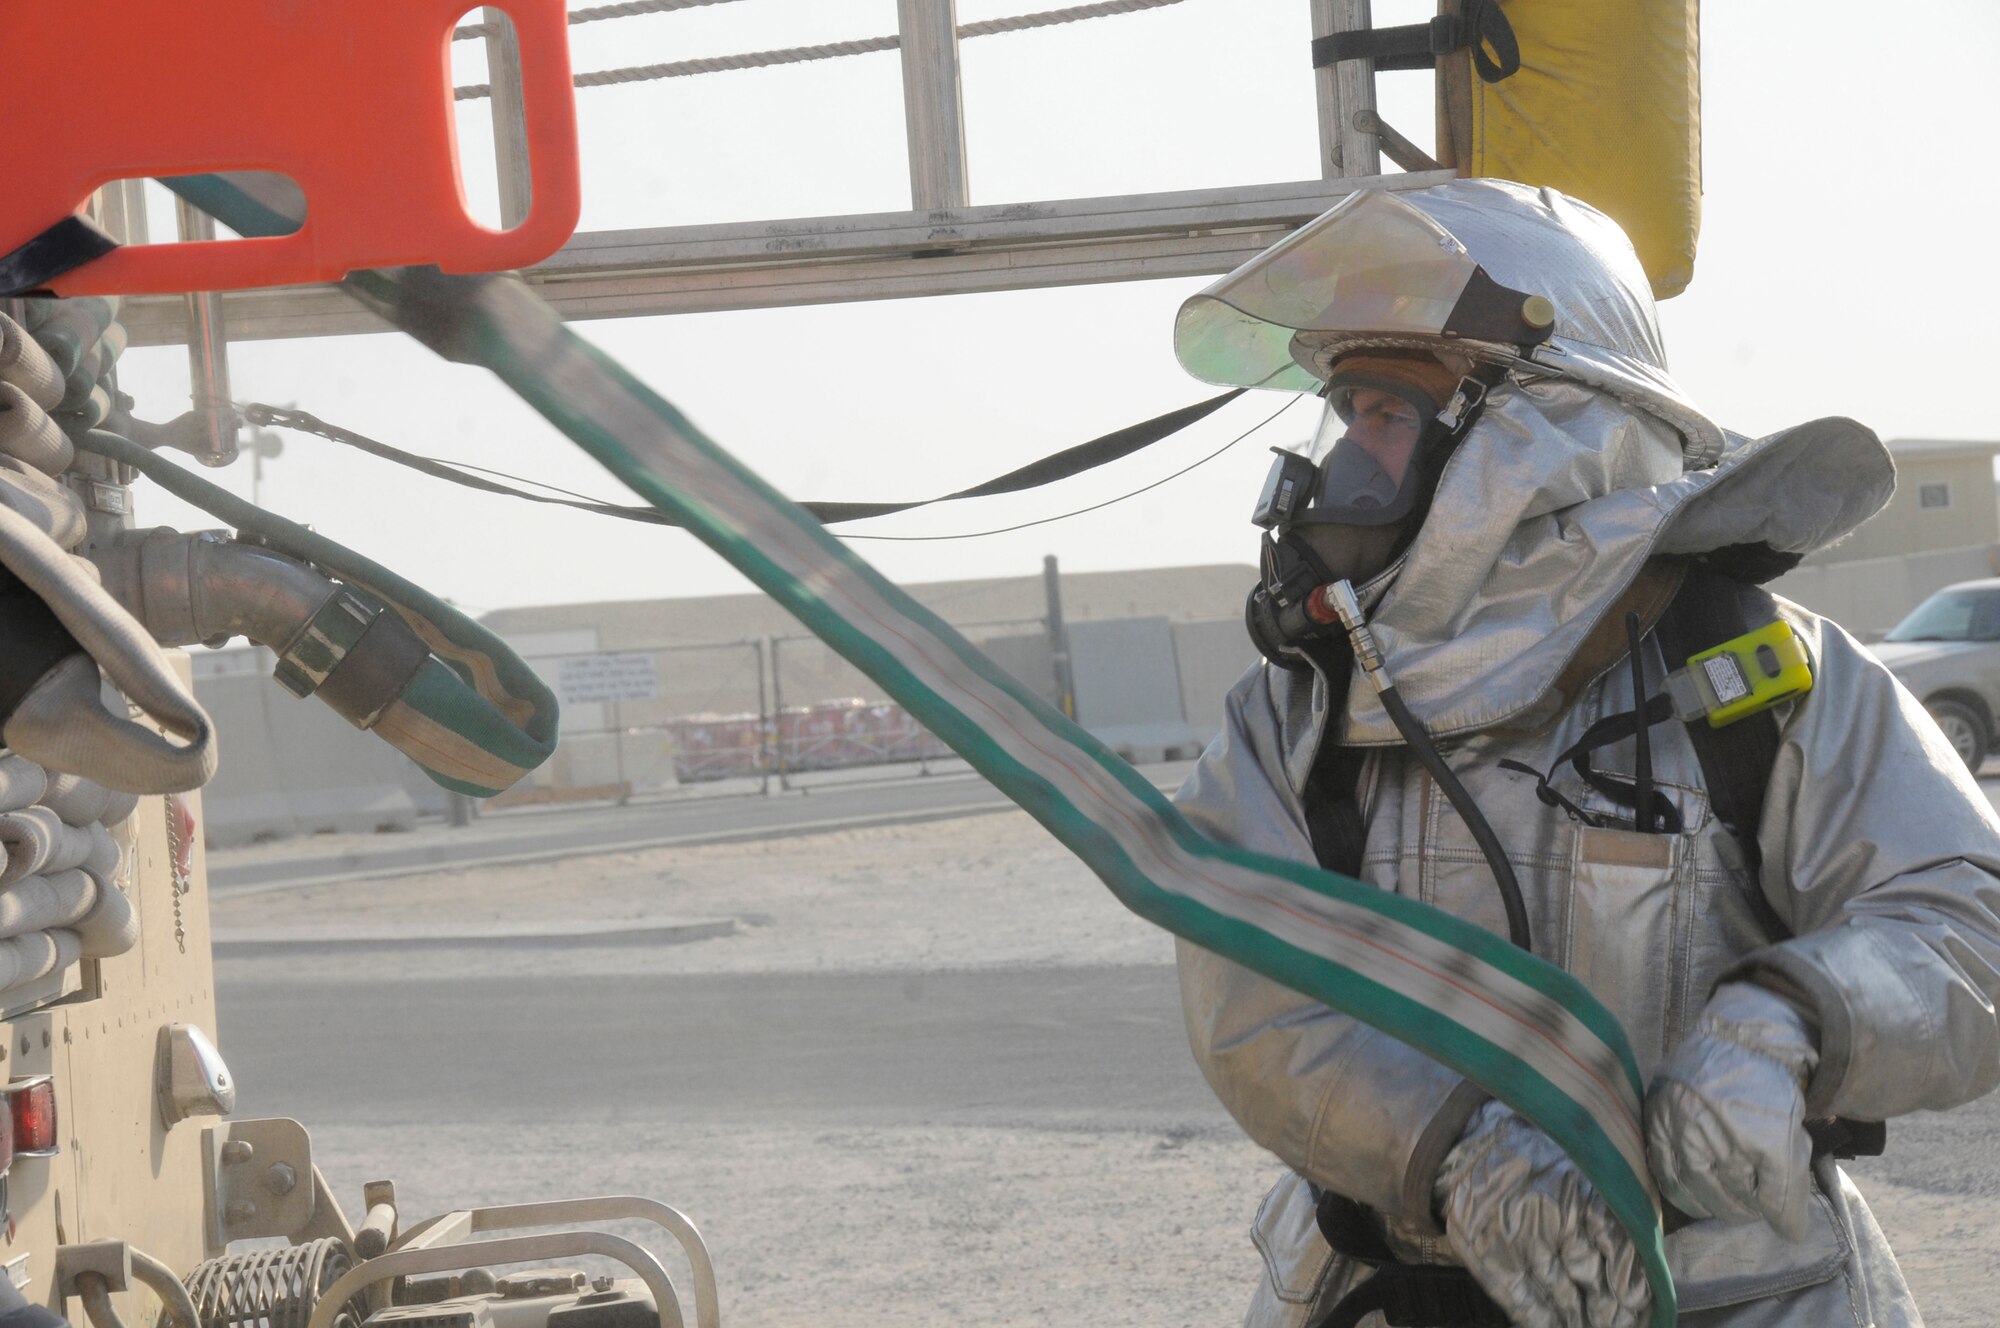 Tech. Sgt. Peter W. Peterson, firefighter crew chief assigned to the 379th Expeditionary Civil Engineer Squadron, pulls out hose as part of crew proficiency training Nov. 20, at an undisclosed air base in Southwest Asia. Daily crew proficiency training ensures these ECES members are prepared for any situation. Sergeant Peterson, a native of Minneapolis, Minn., is deployed from Whiteman Air Force Base, Mo., in support of Operations Iraqi and Enduring Freedom and Joint Task Force-Horn of Africa. (U.S. Air Force photo by Staff Sgt. Darnell T. Cannady/Released)